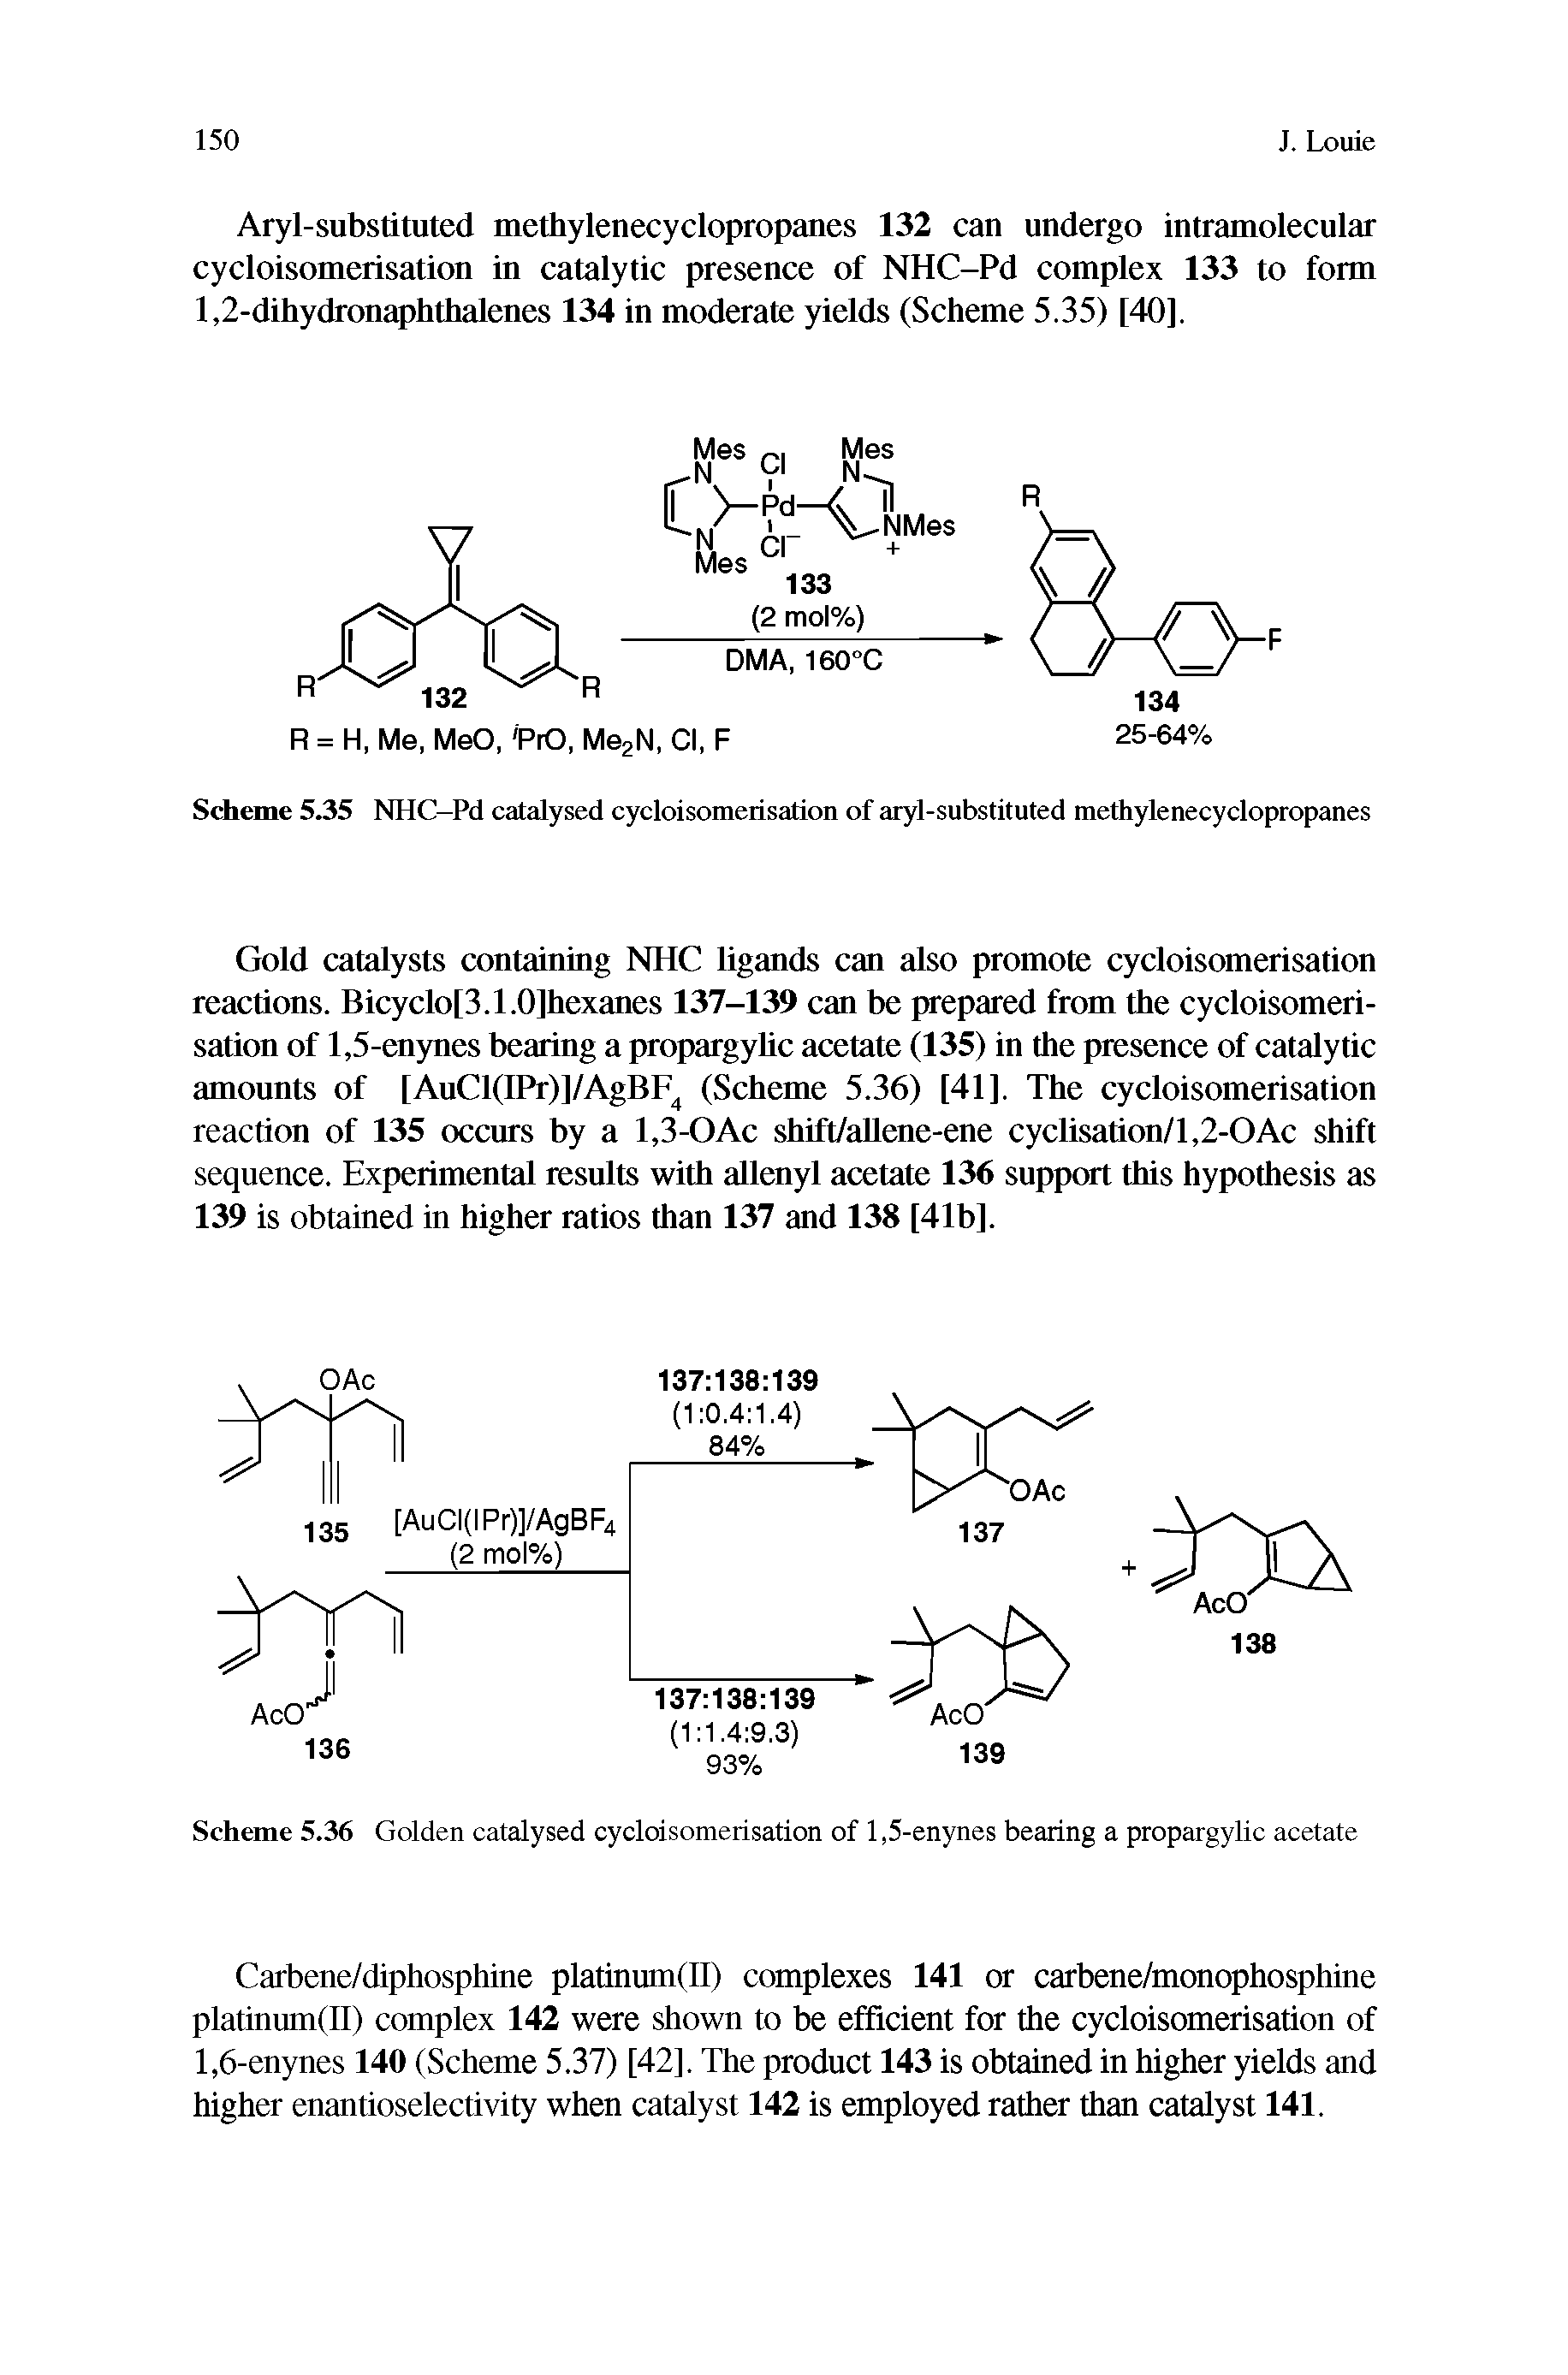 Scheme 5.36 Golden catalysed cycloisomerisation of 1,5-enynes bearing a propargylic acetate...